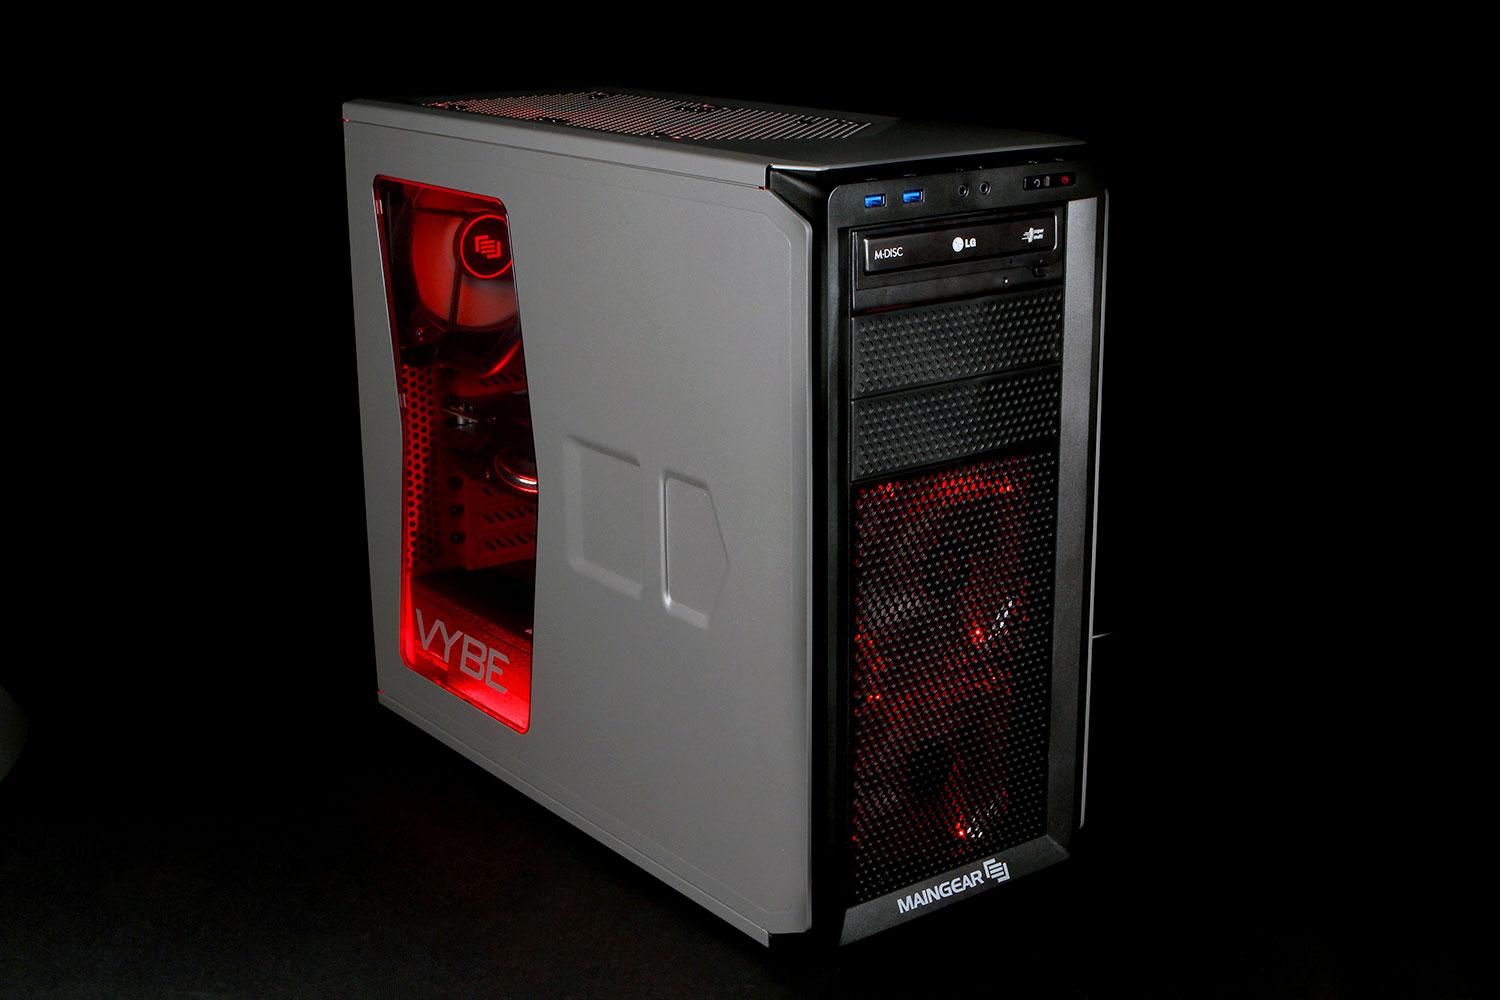 Maingear Vybe Z97 (2014) review